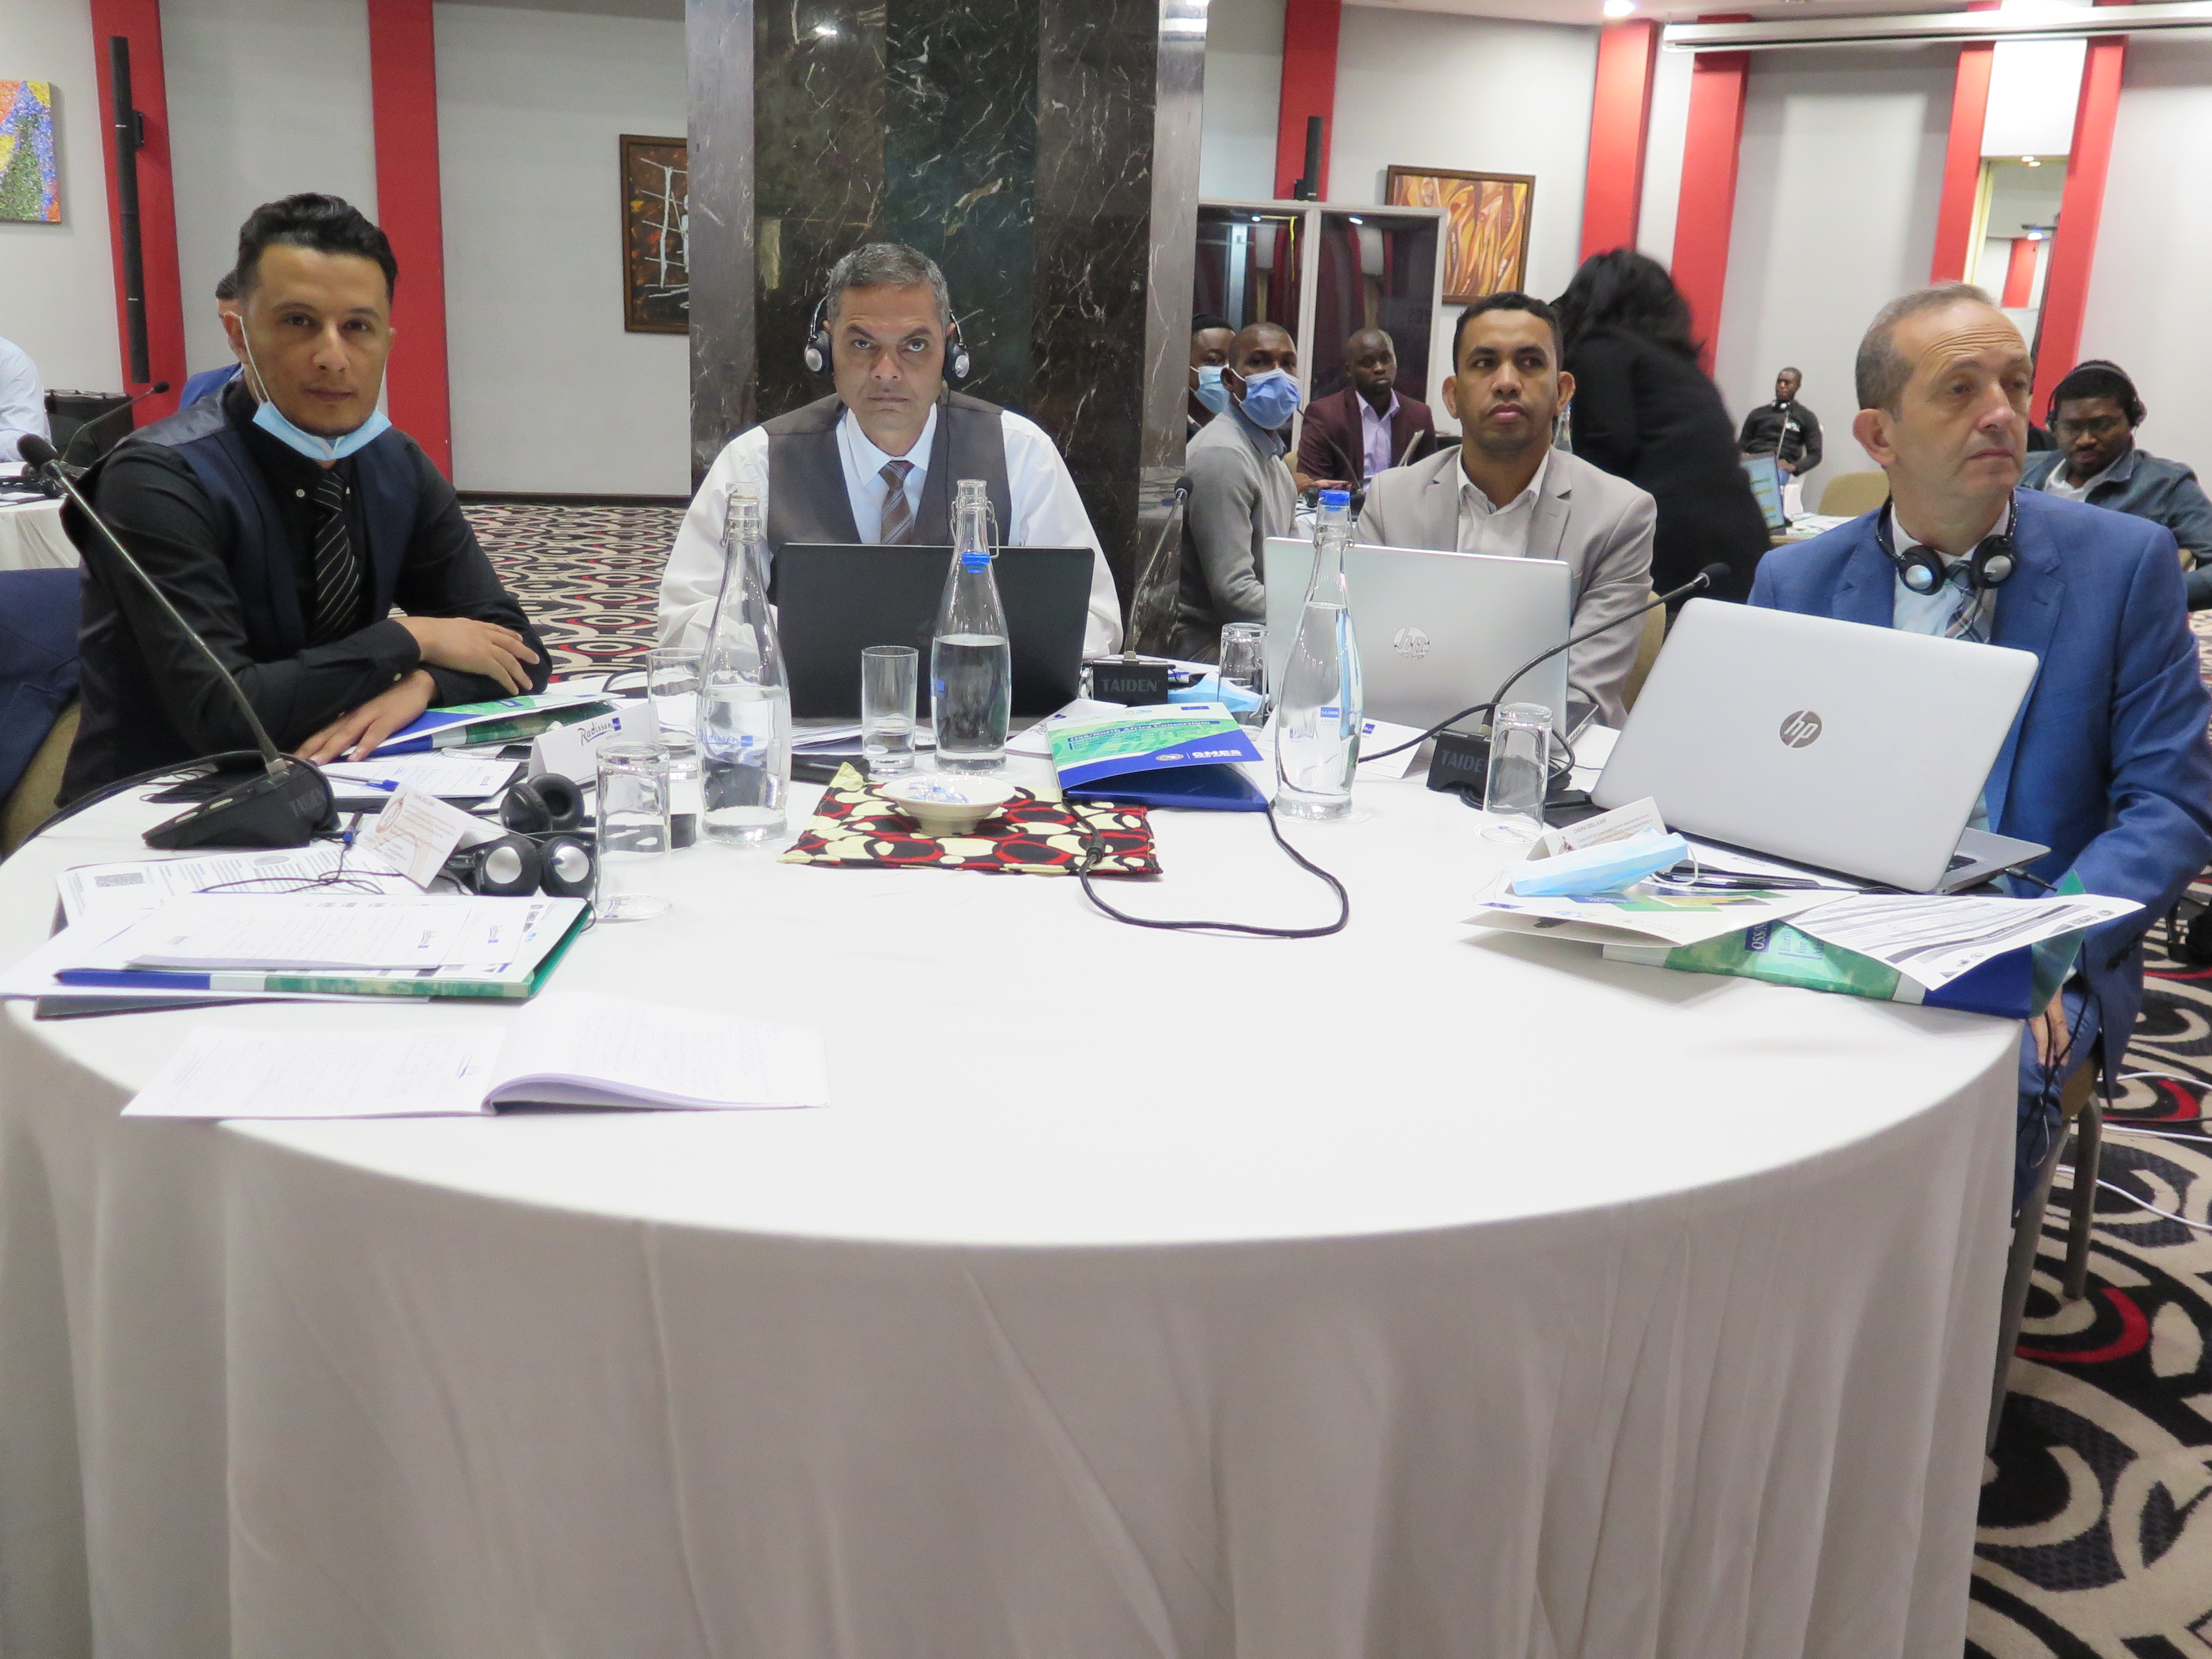 The OSS/North Africa Consortium takes part in the GMES&Africa